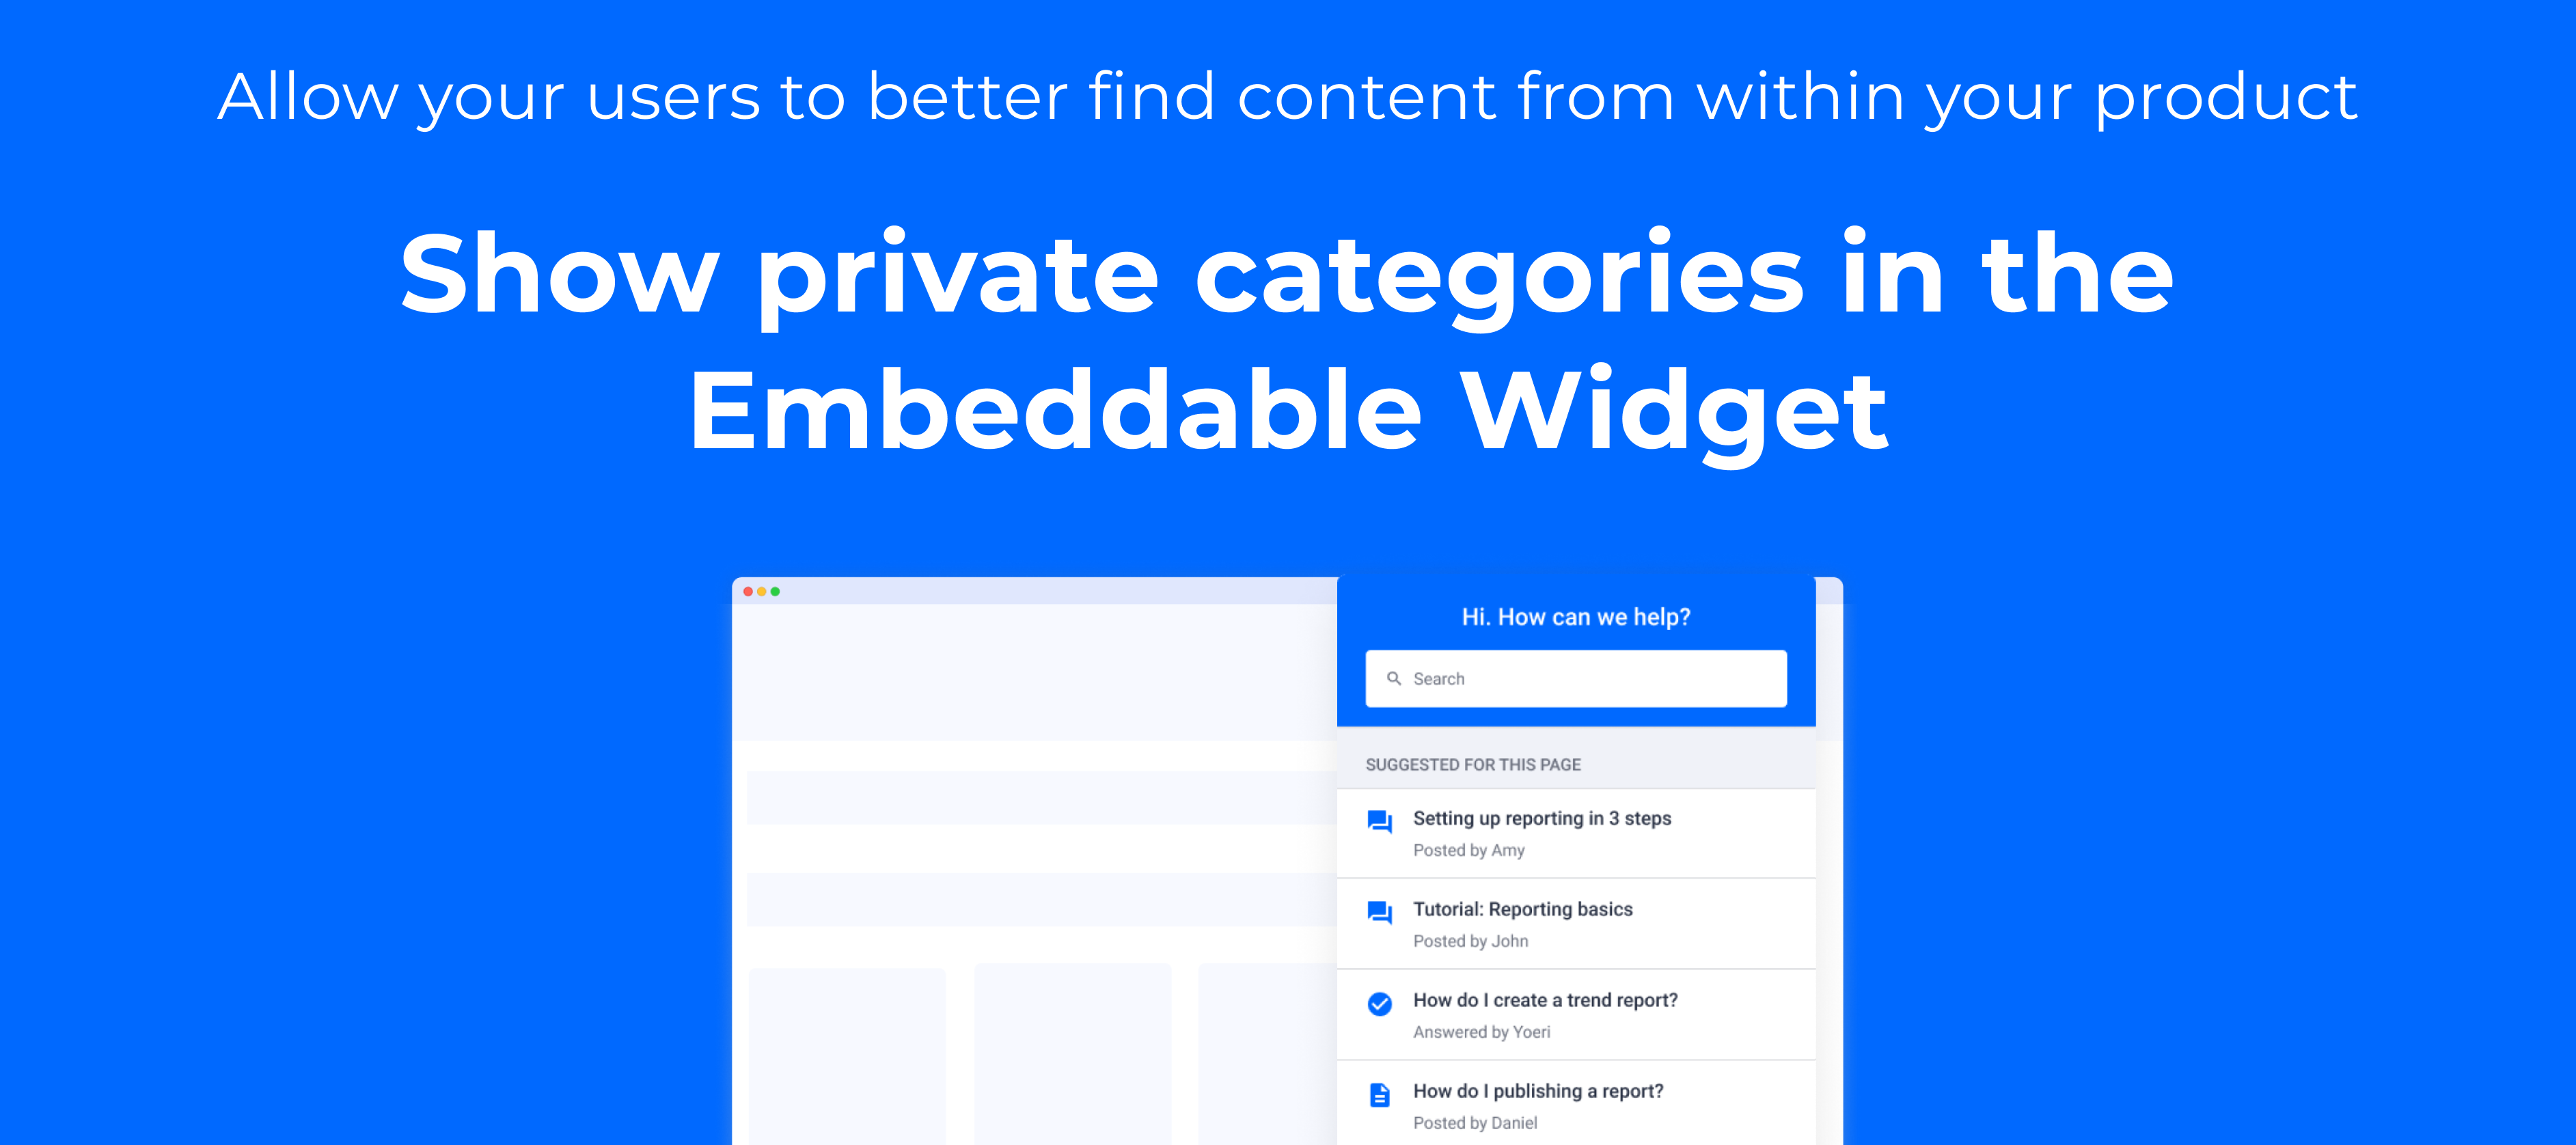 Show private categories in the Embeddable Widget